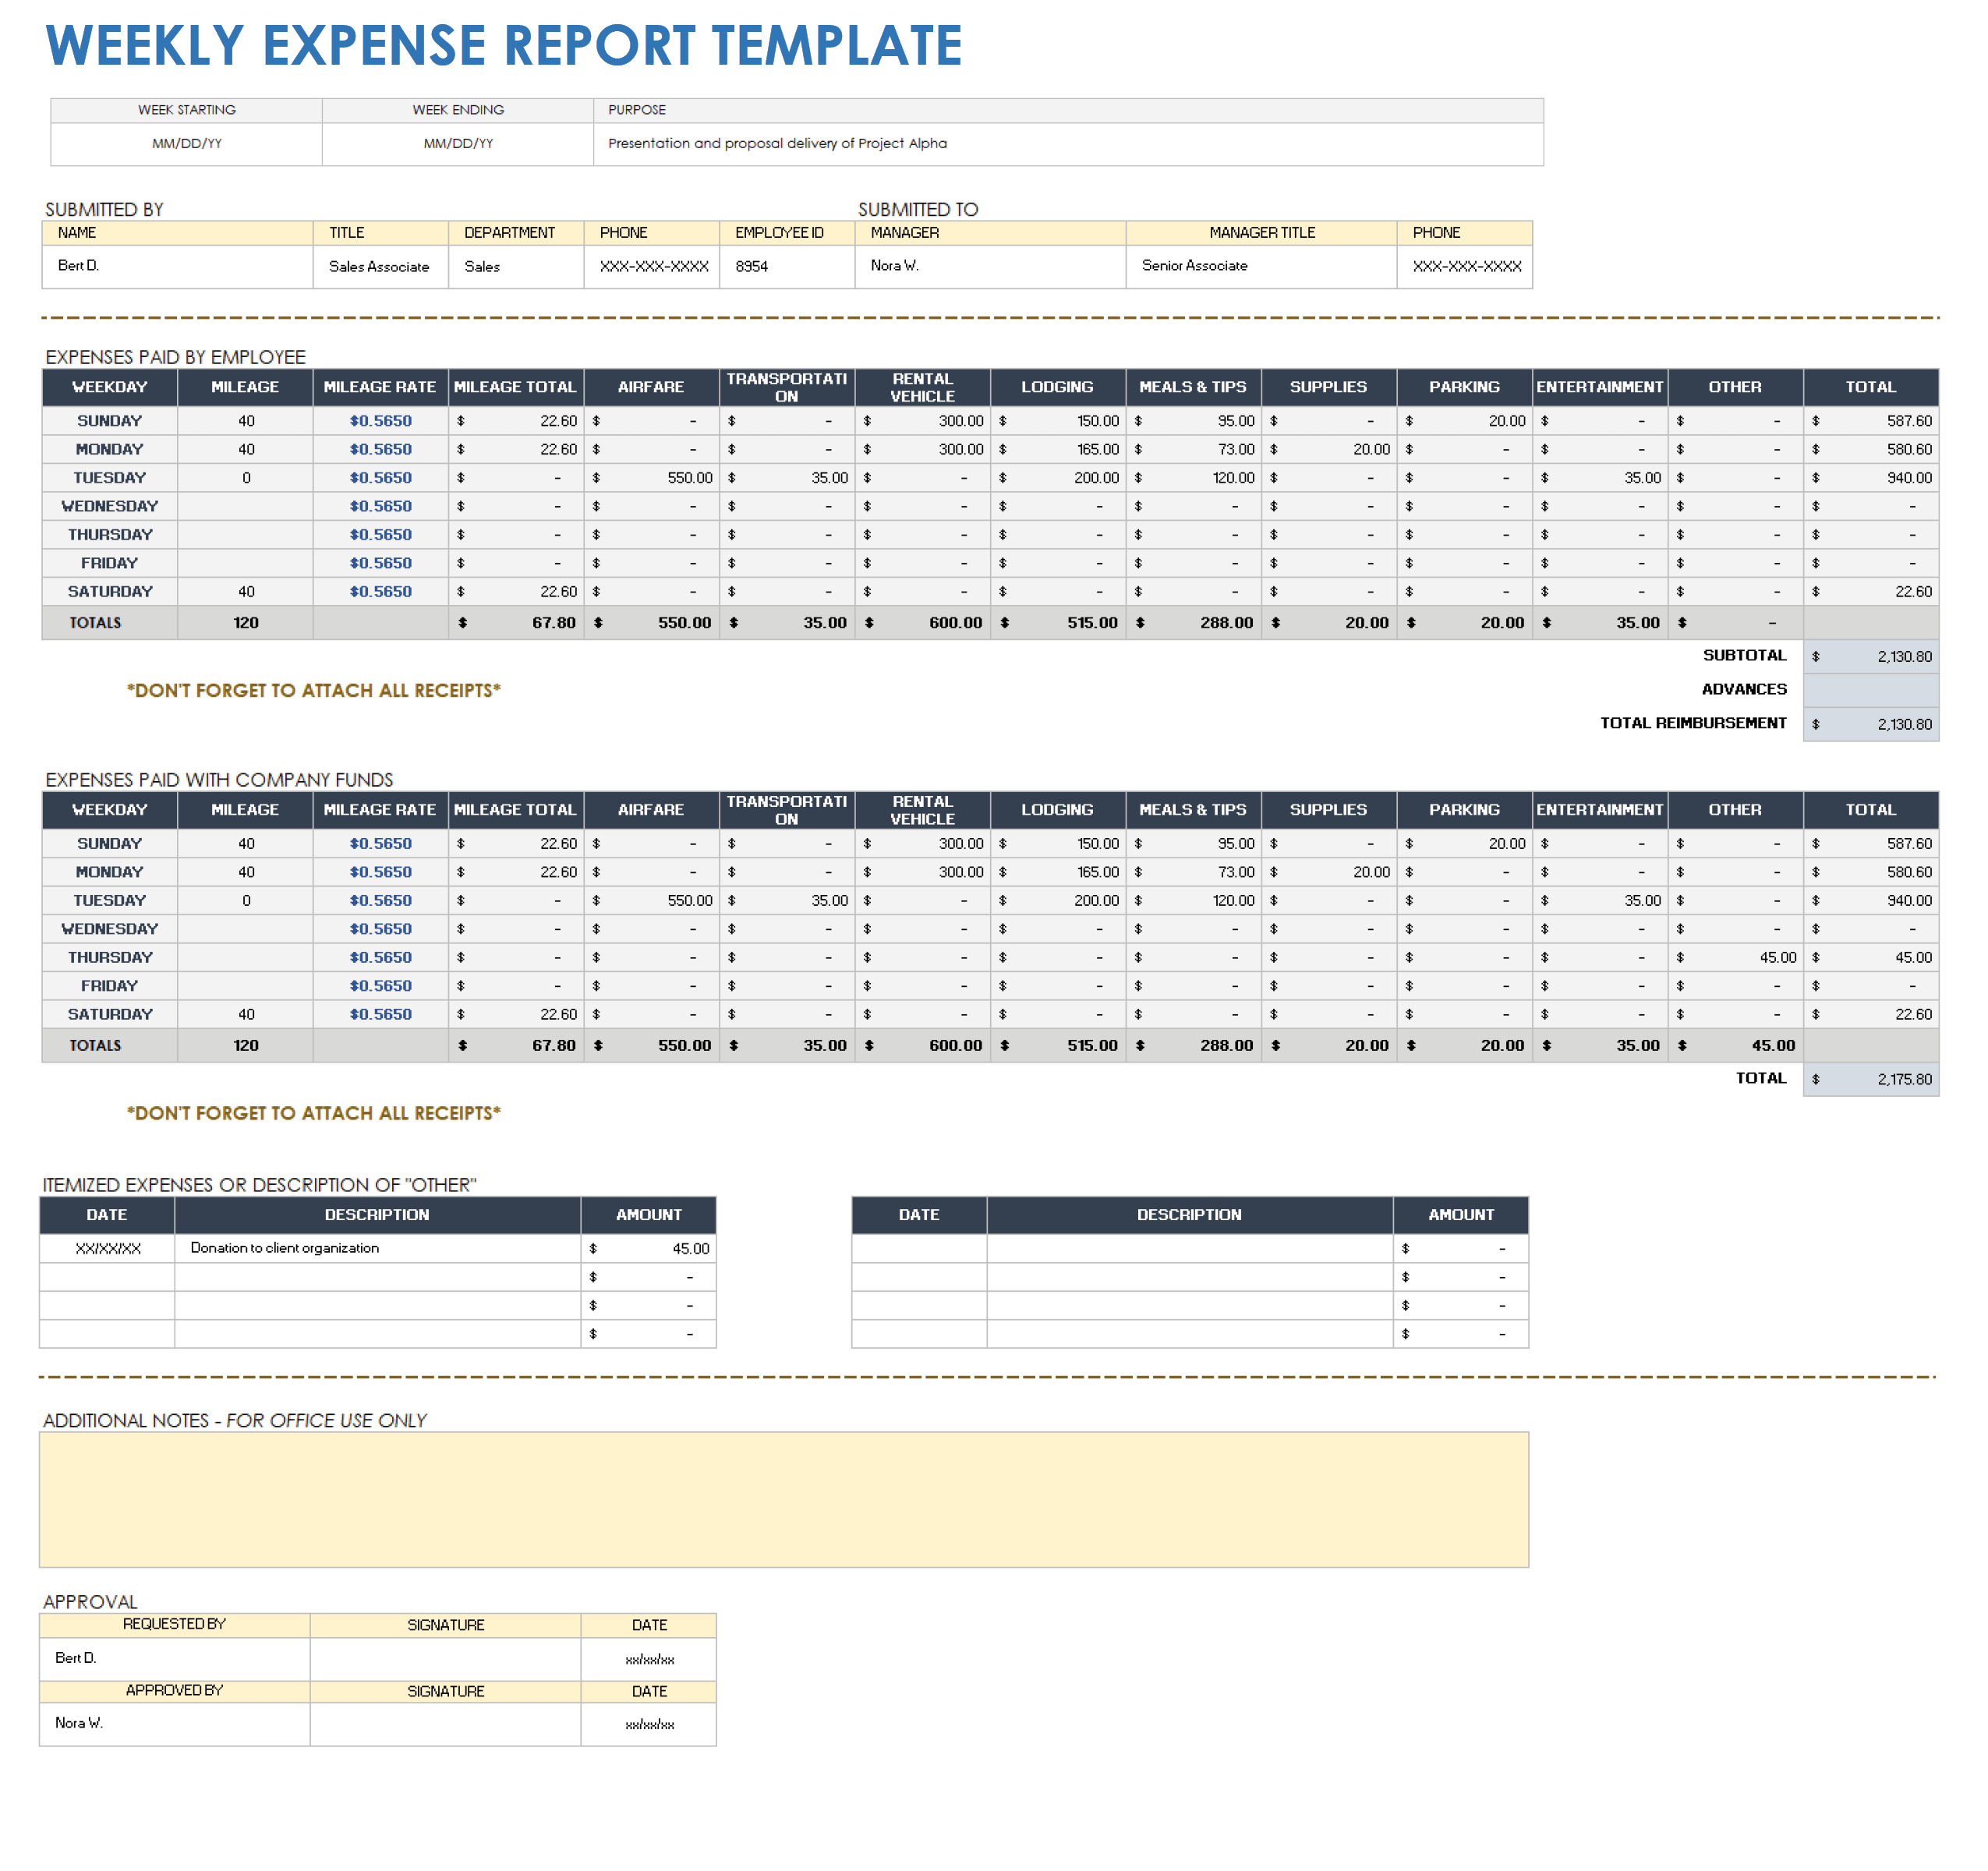 expense tracking excel template